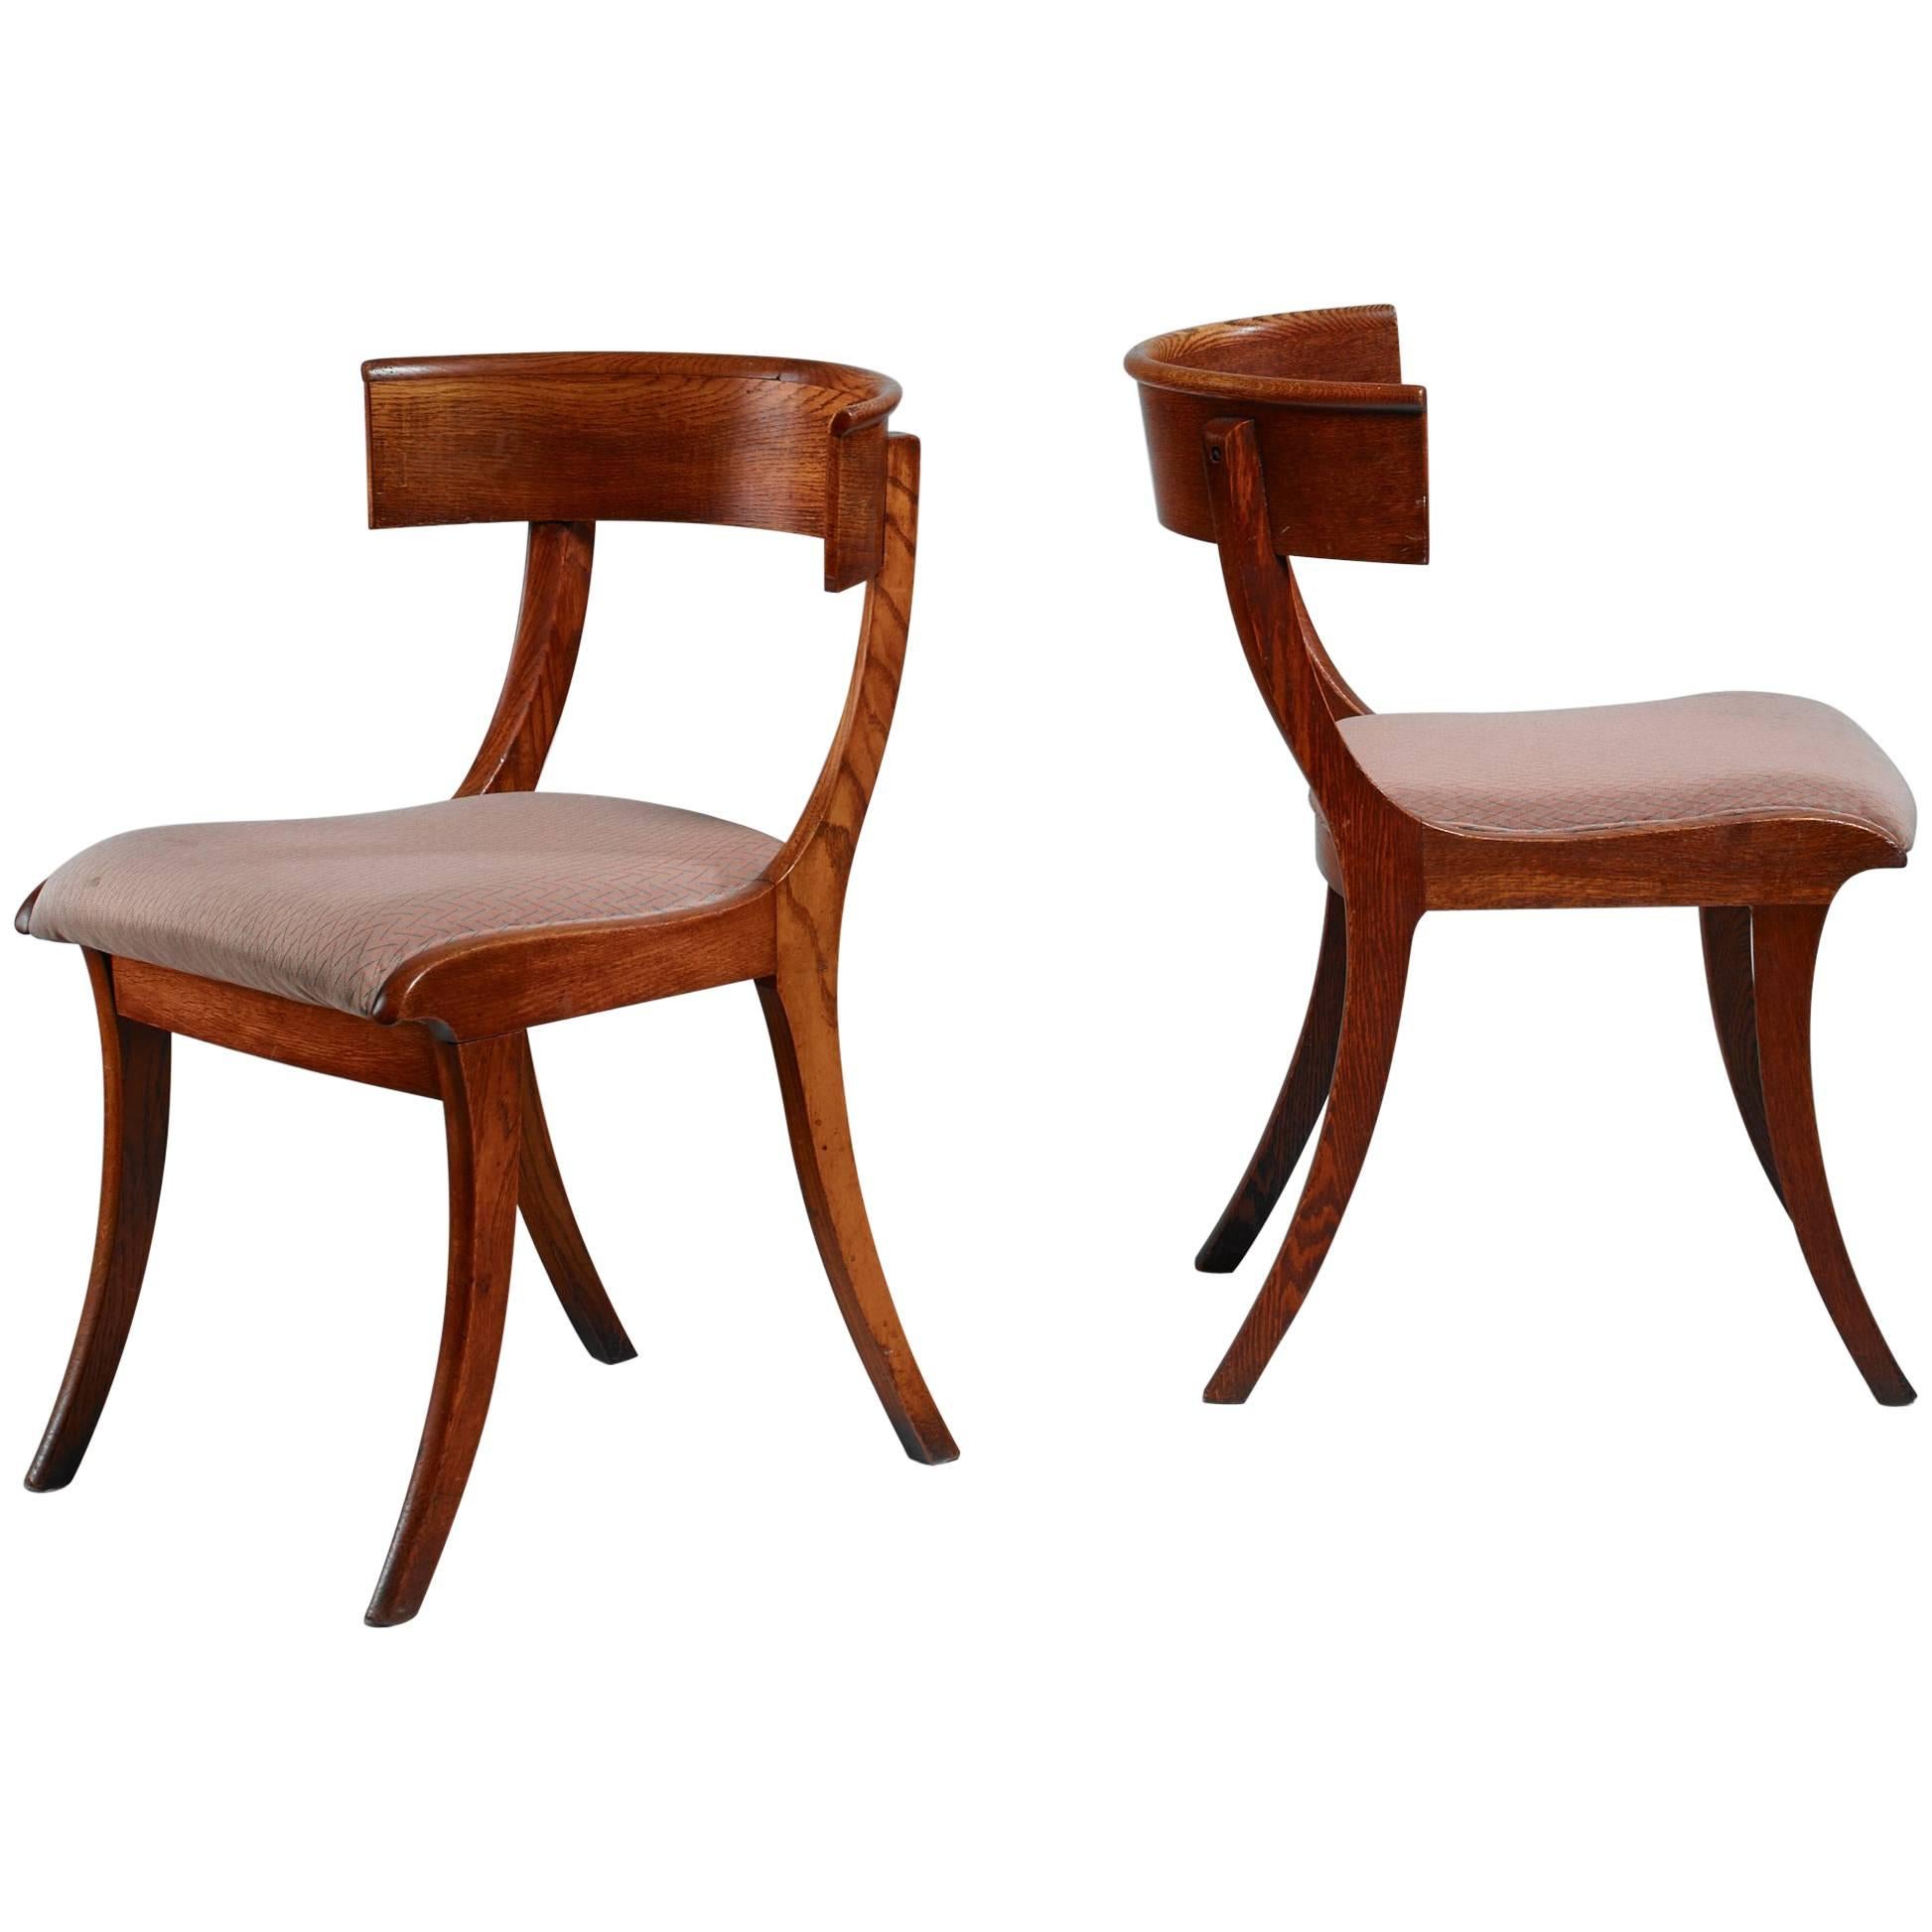 Pair of Danish Klismos Chairs, Early 20th Century For Sale